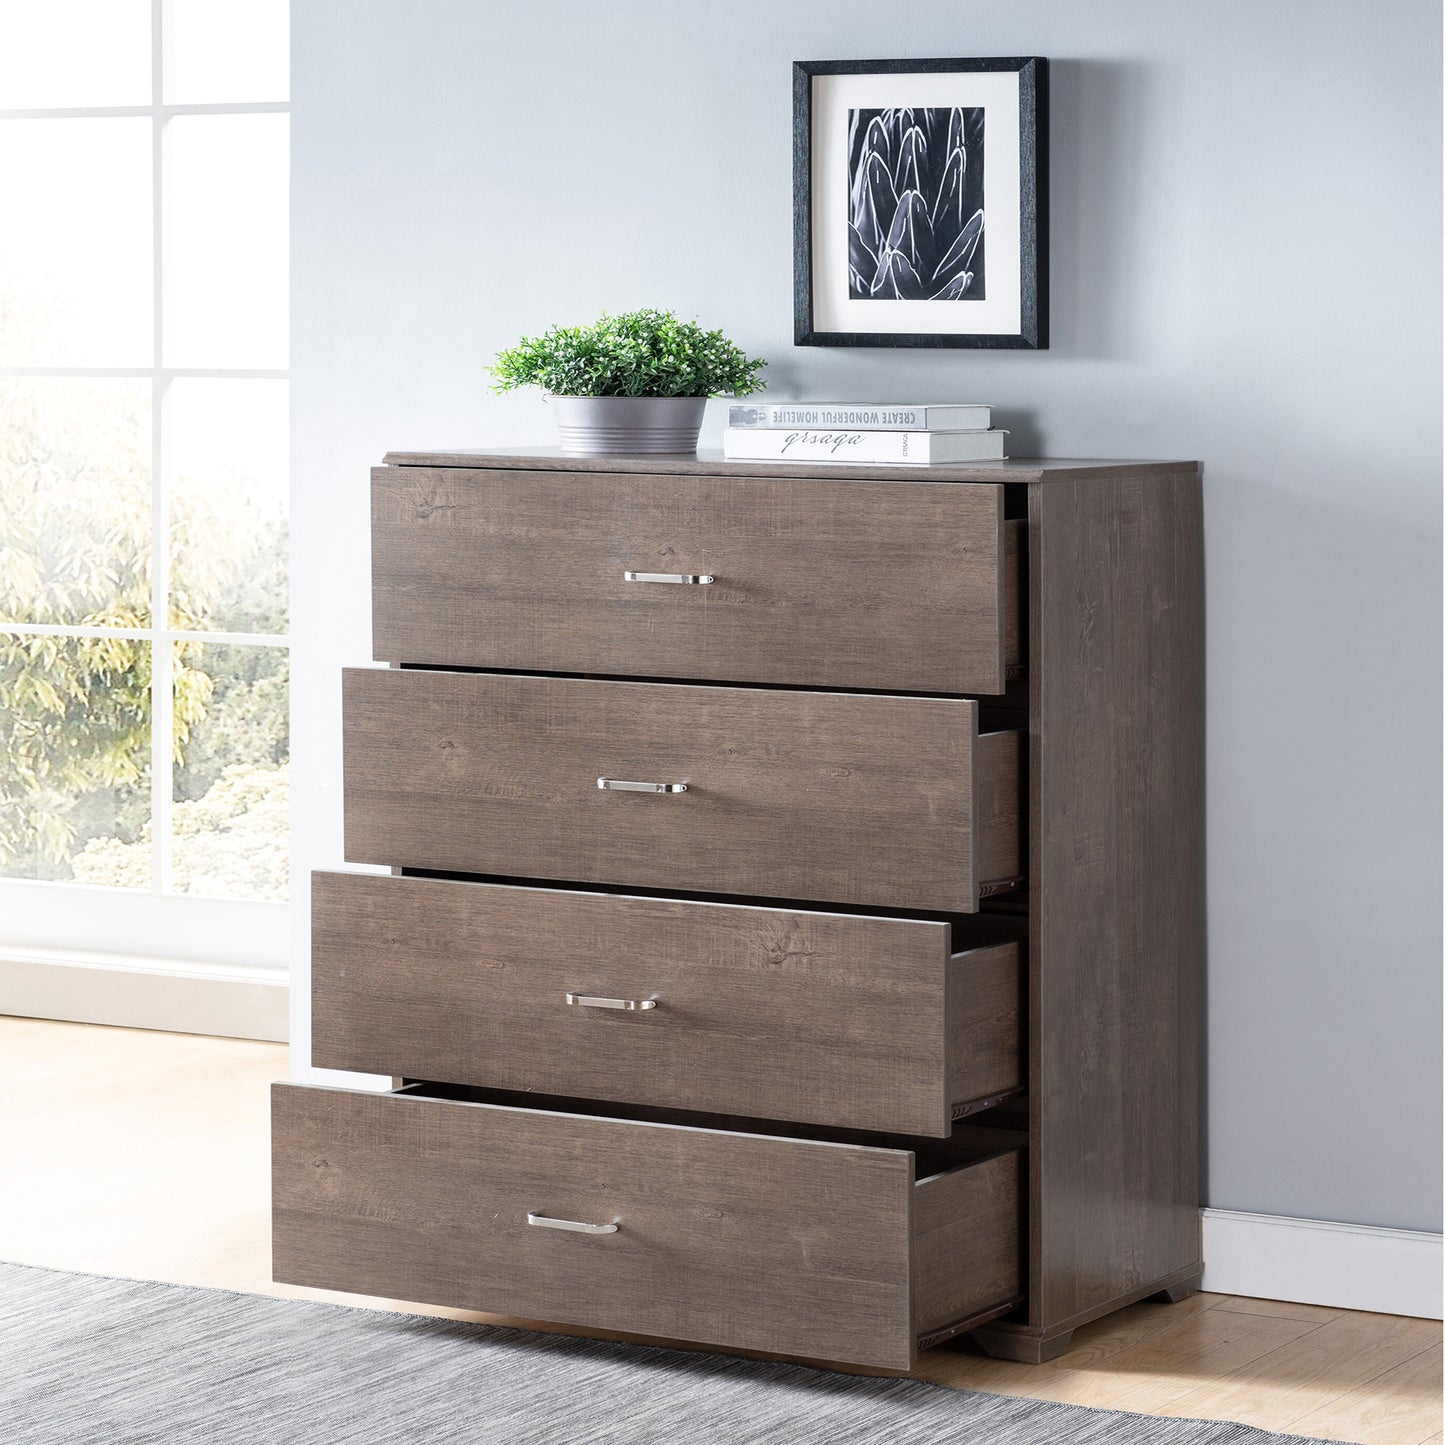 Left angled contemporary walnut four-drawer chest dresser with all drawers open in a bedroom with accessories